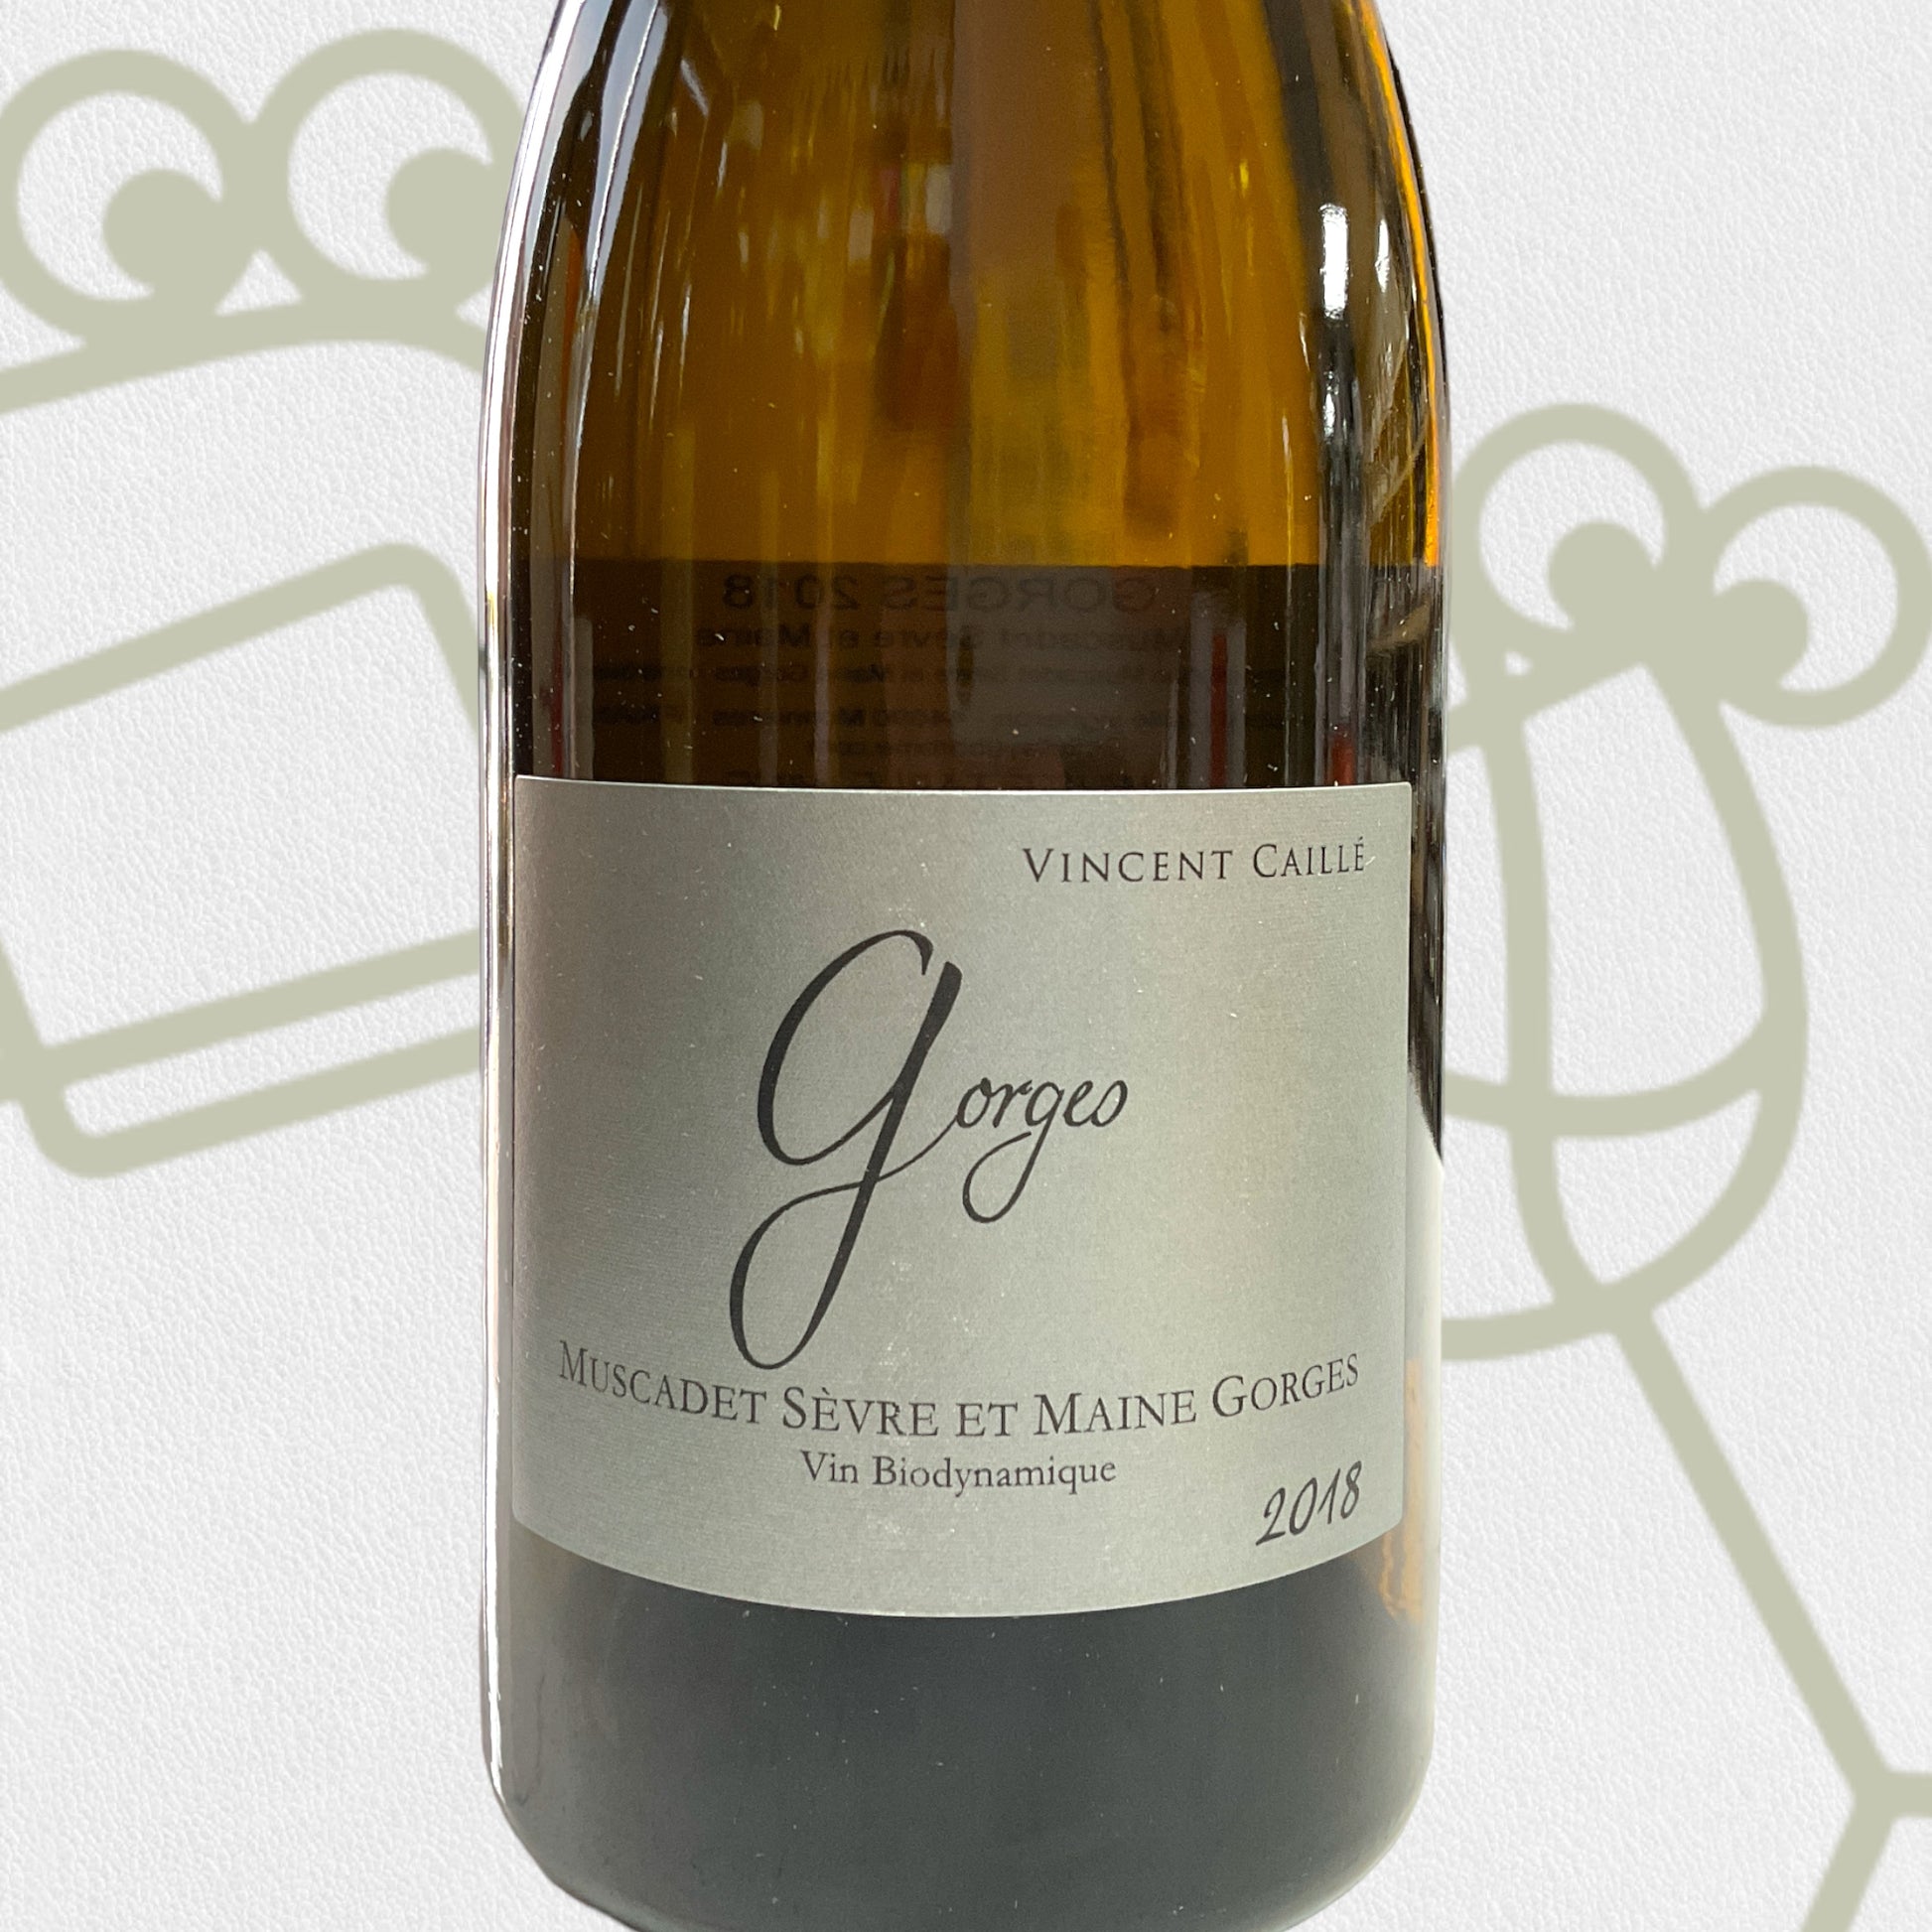 Le Fay d'Homme Muscadet 'Gorges' 2018 Loire Valley, France - Williston Park Wines & Spirits